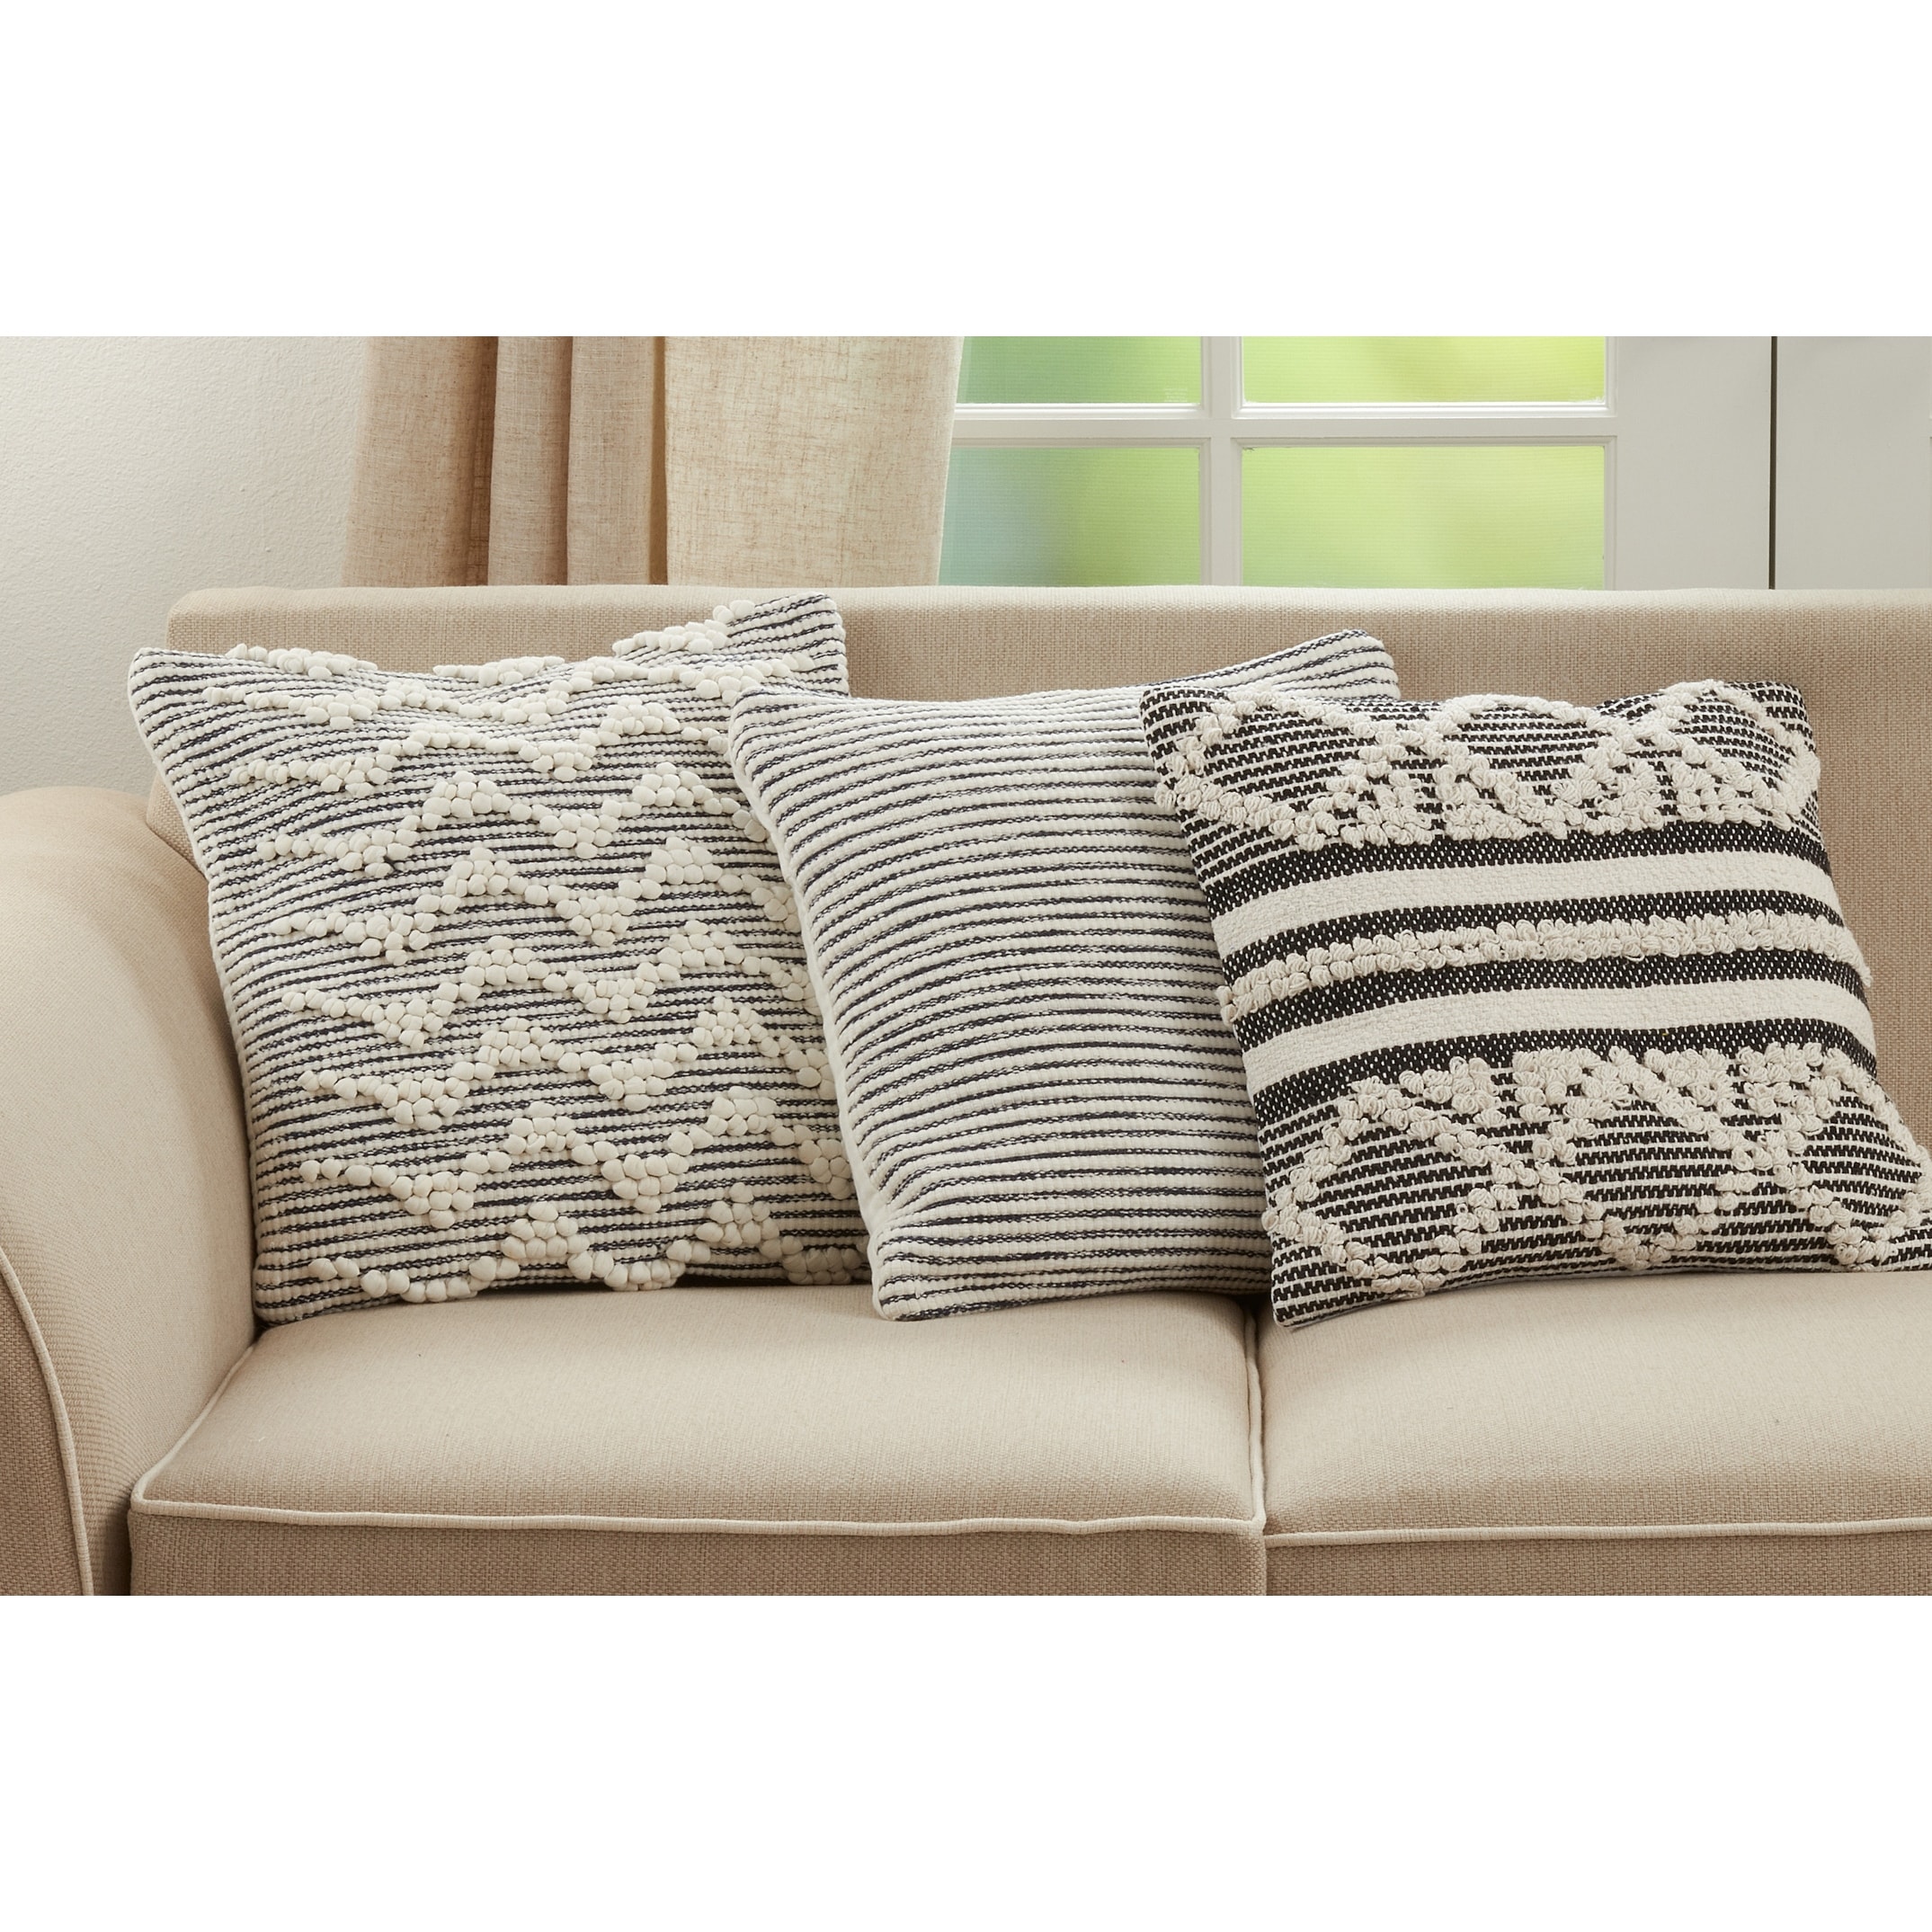 Throw Pillow With Woven Striped Design